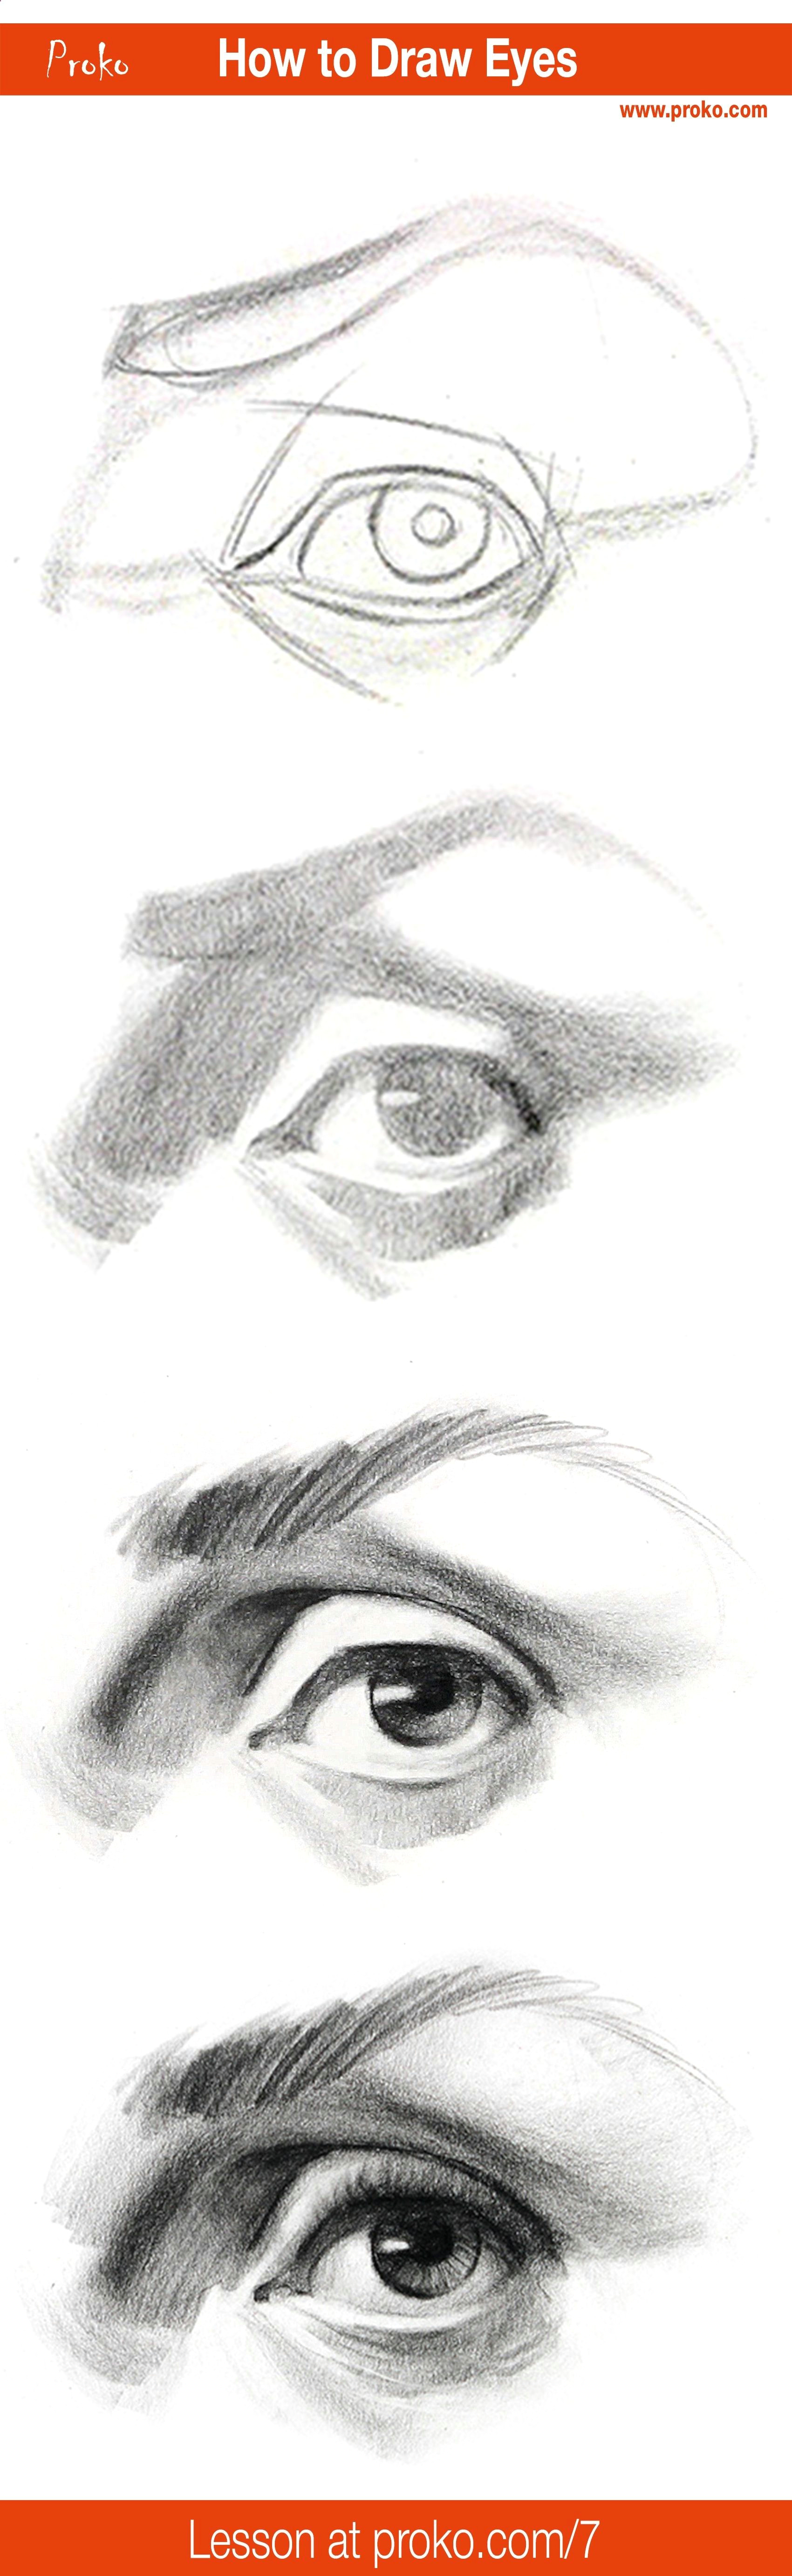 Drawing Eye Proko Drawing Pencil Portraits Draw Realistic Eyes with This Step by